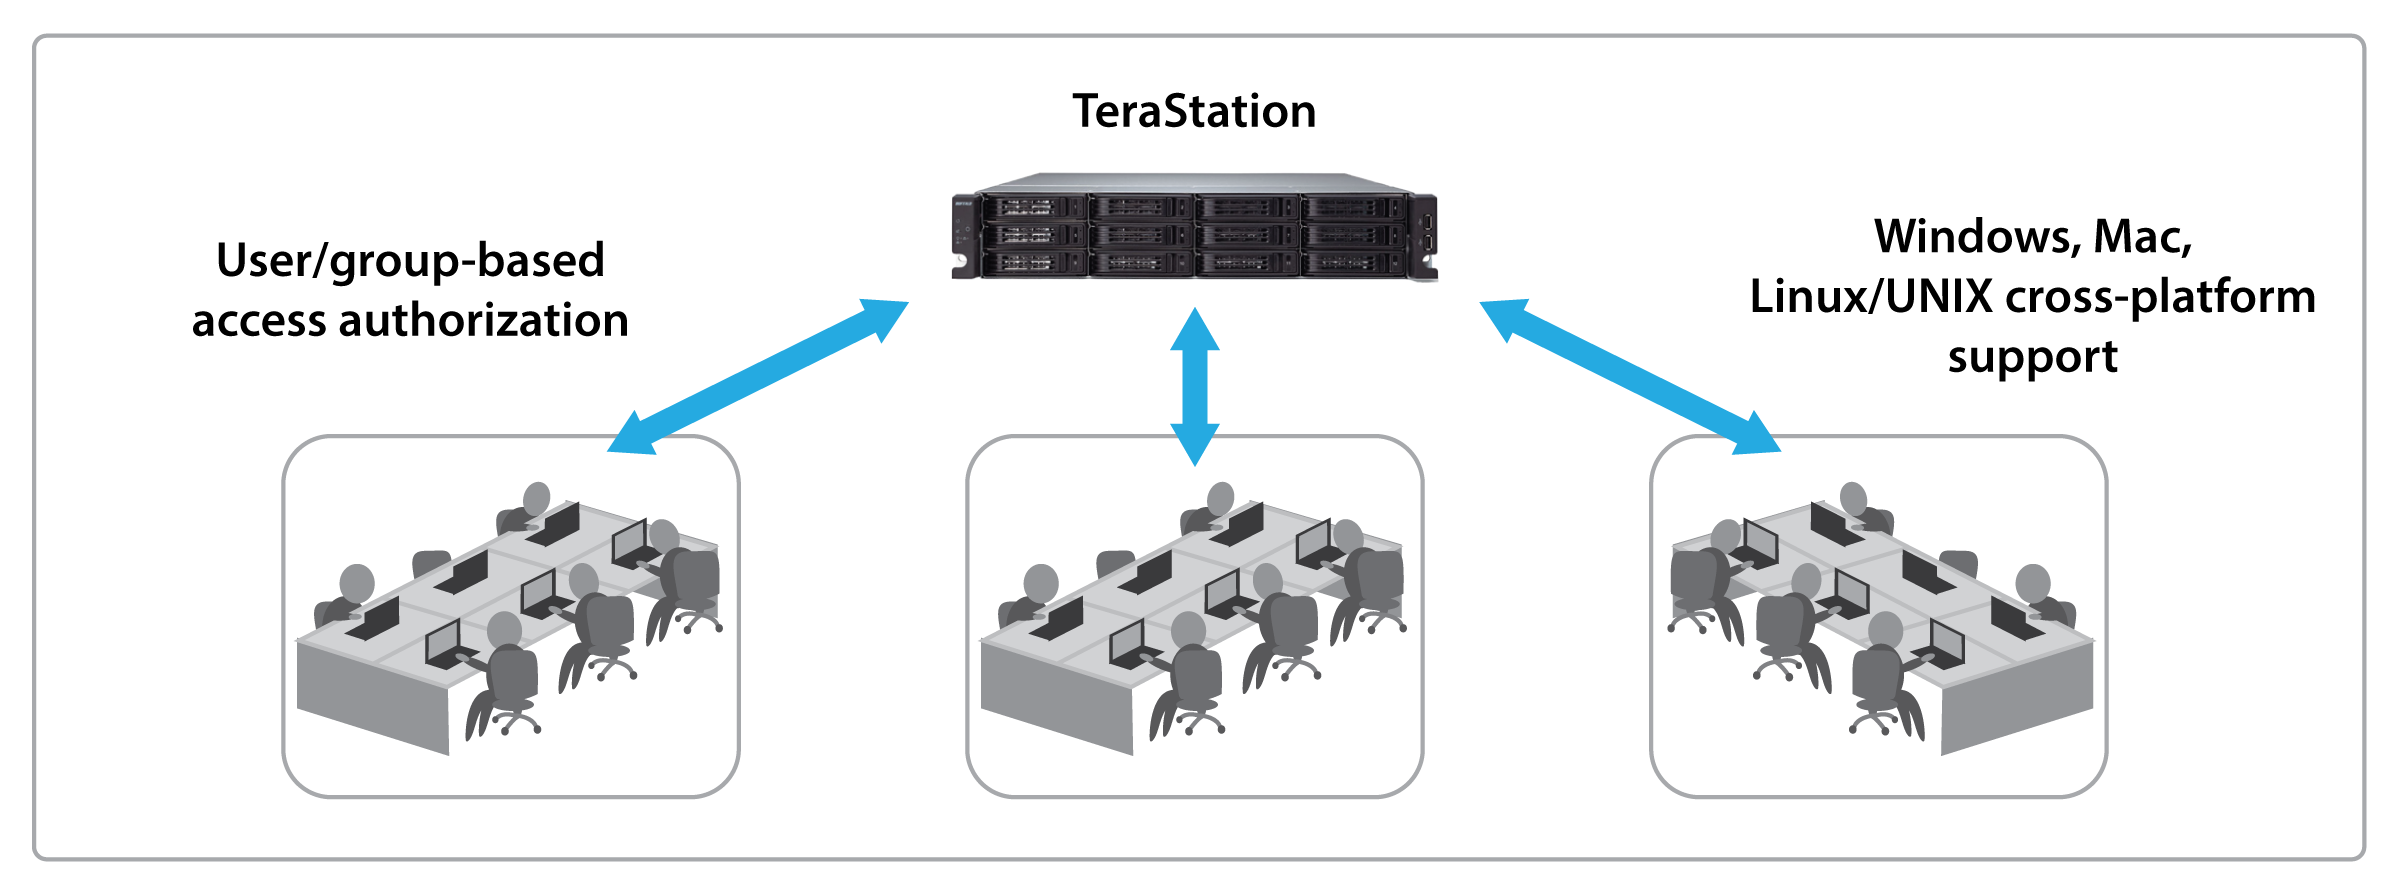 terastation 7000 reliable and secure network storage